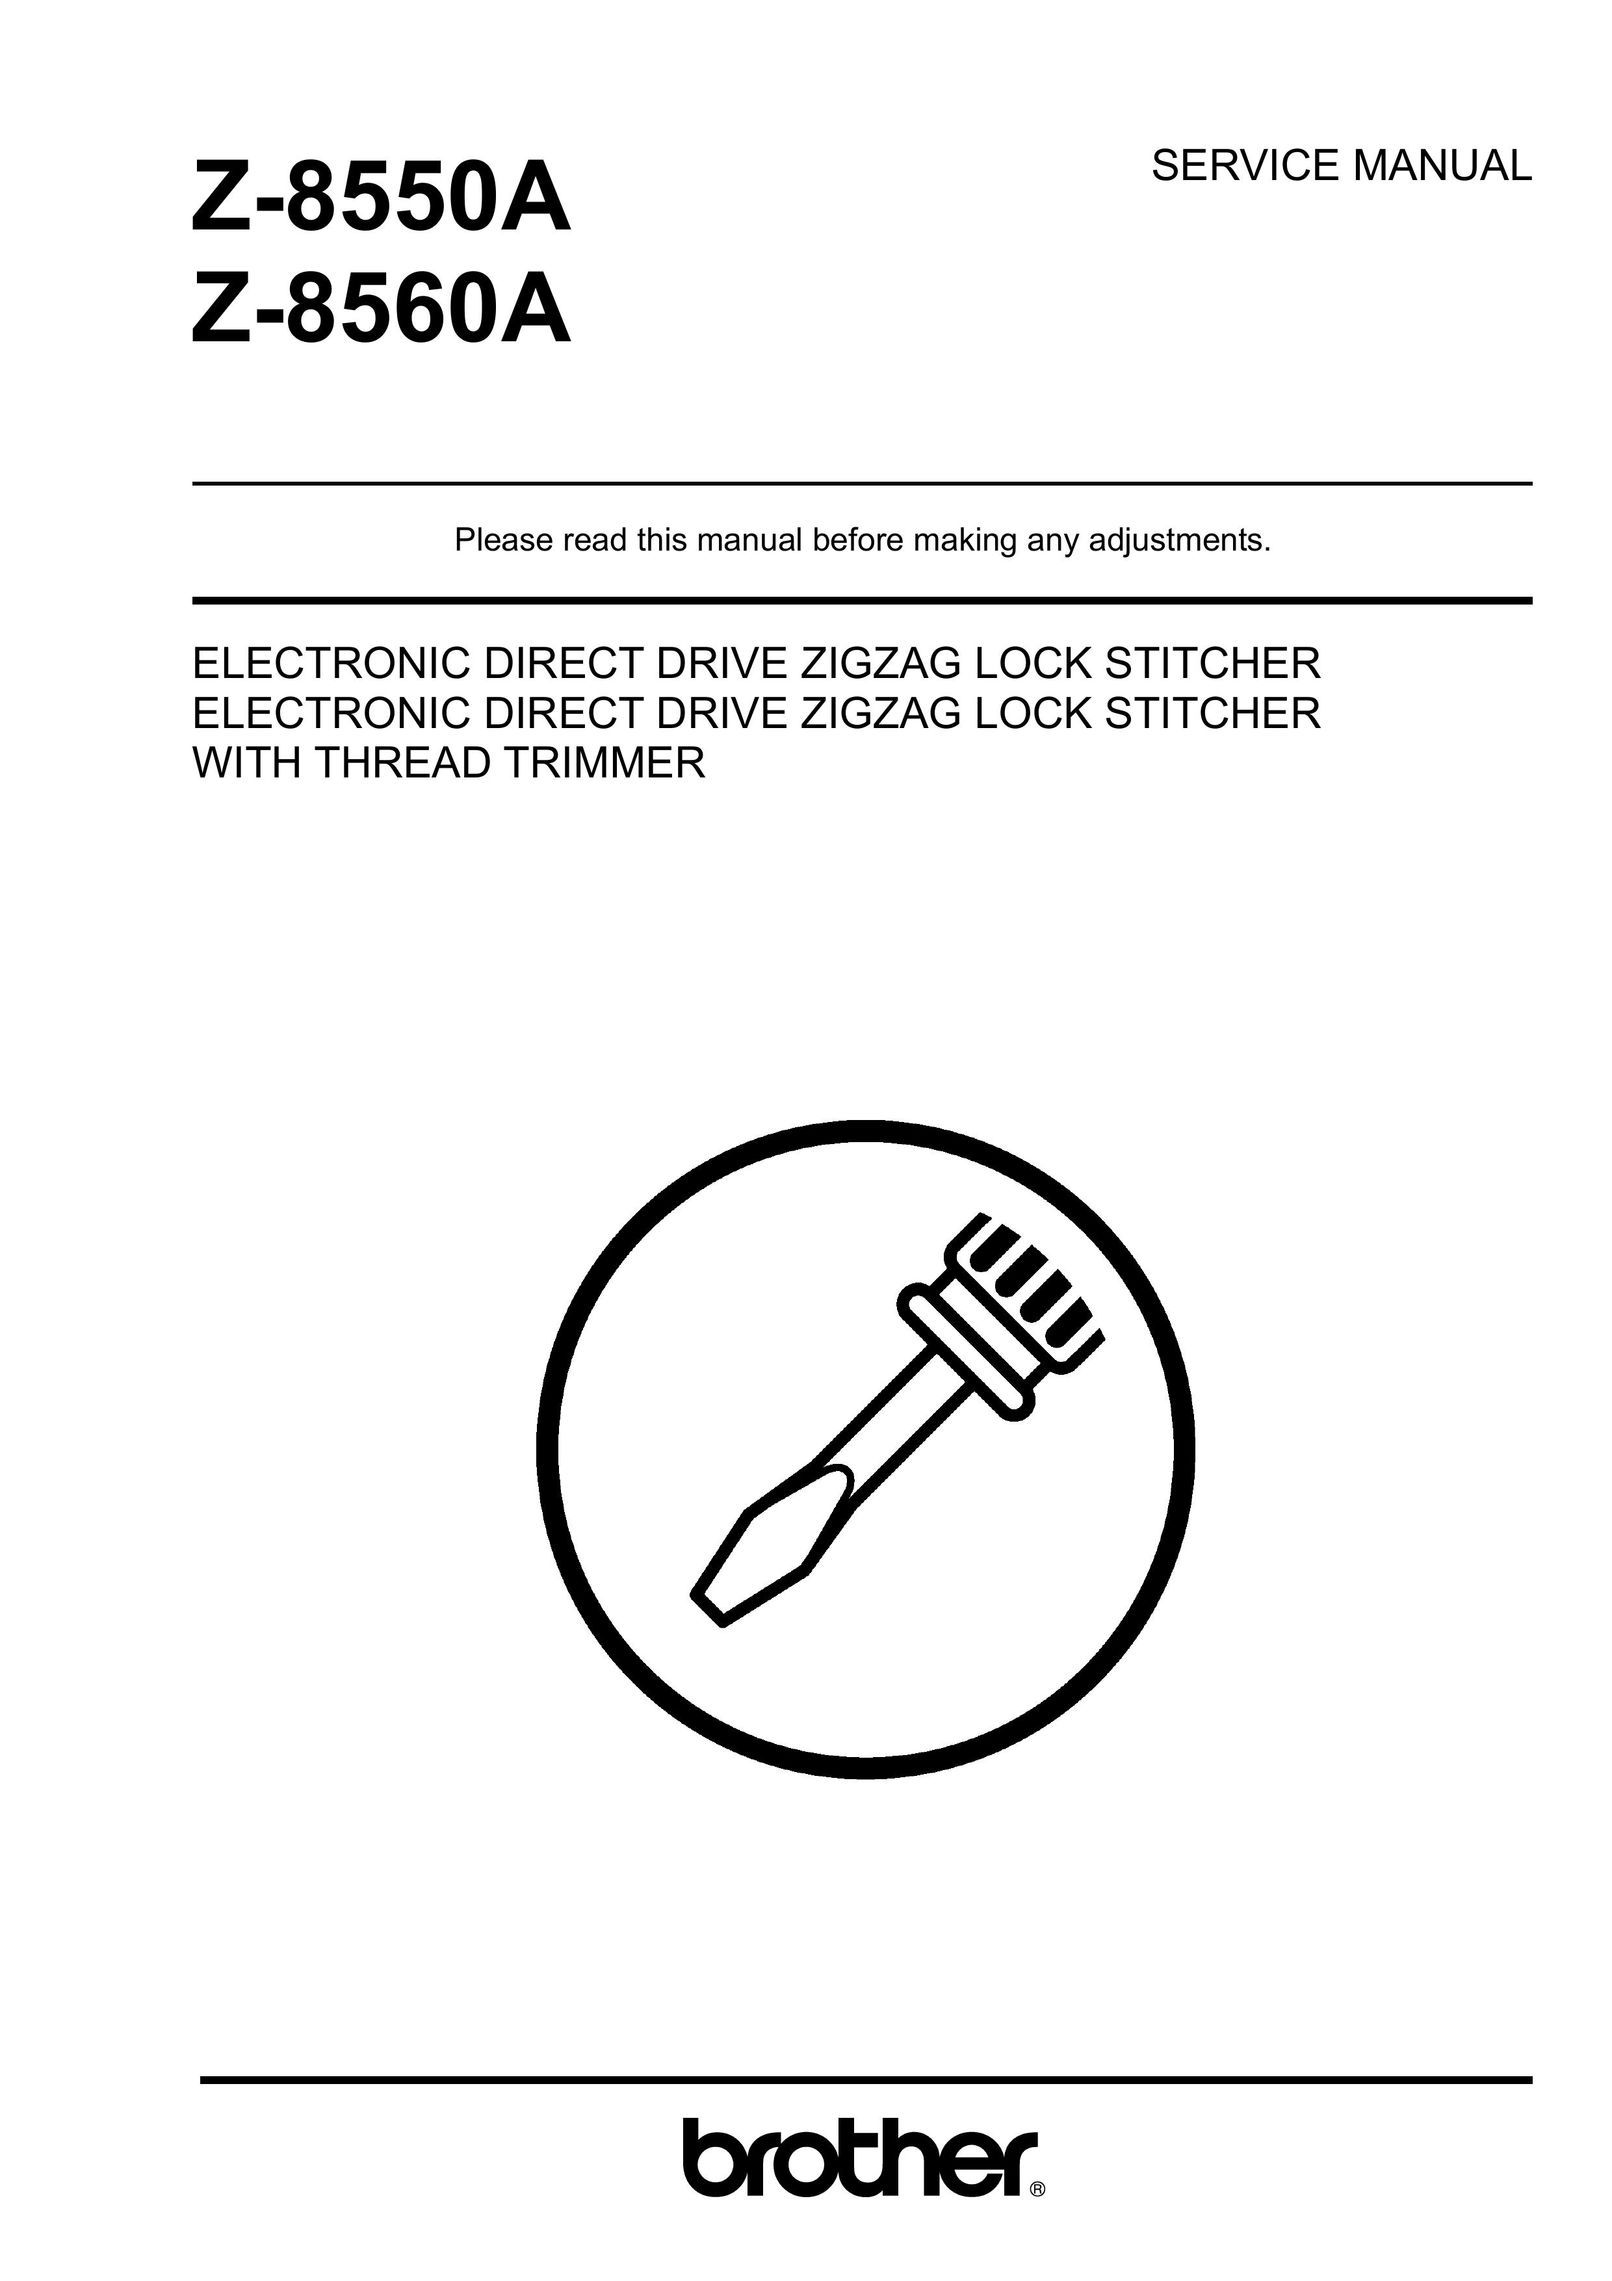 Brother Z-8550A Pet Fence User Manual